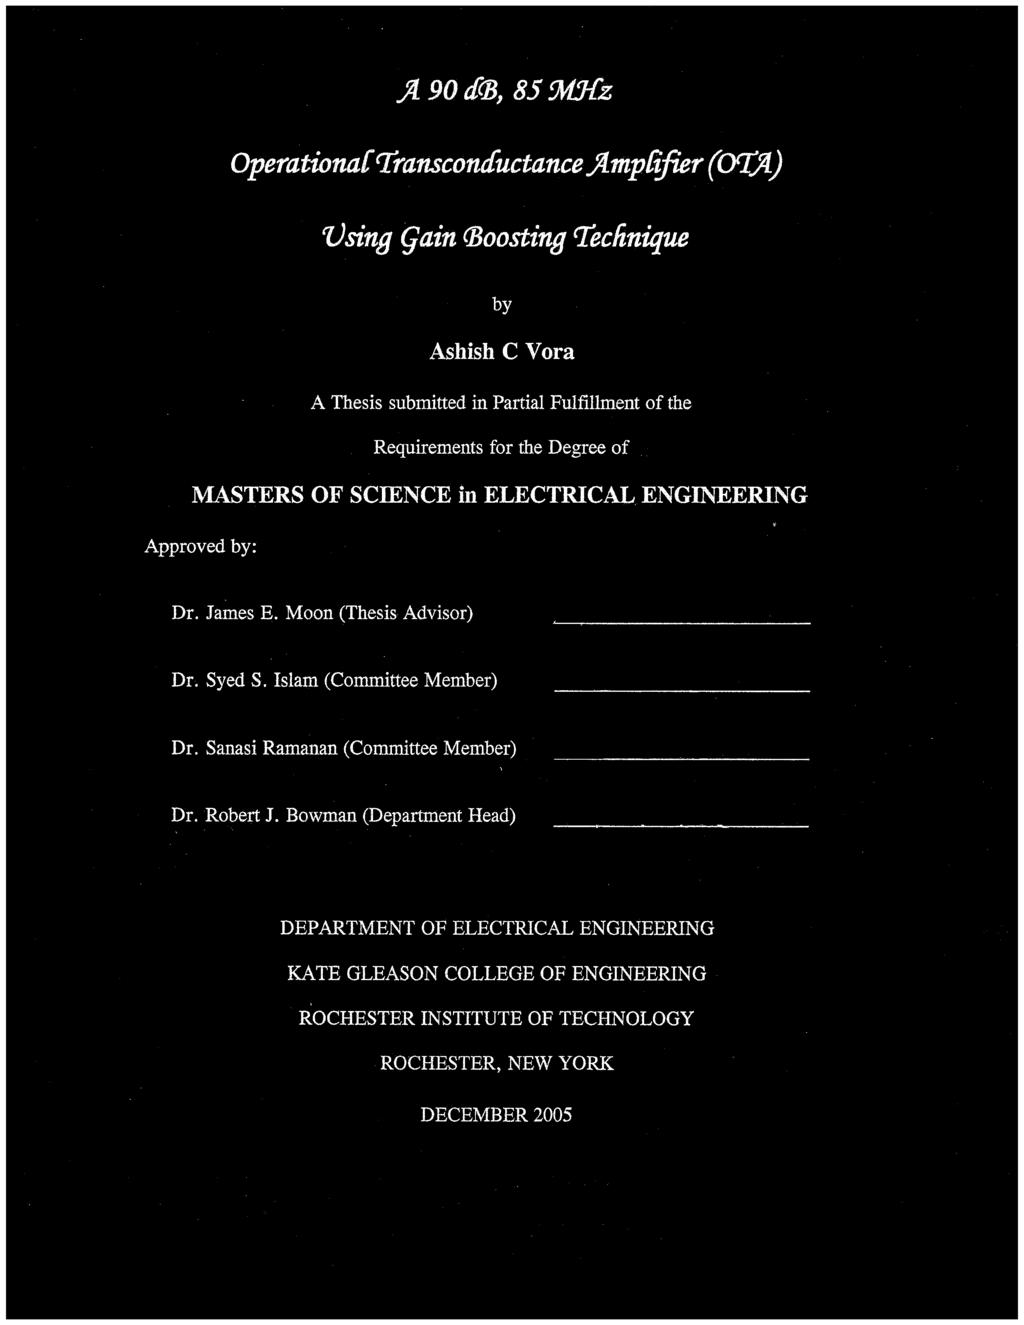 ) 90^B, 85ßz Operational Transconductance Amplifier (OcC4) Vsing Gain Boosting Technique by Ashish C Vora A Thesis submitted in Partial Fulfillment of the Requirements for the Degree of MASTERS OF